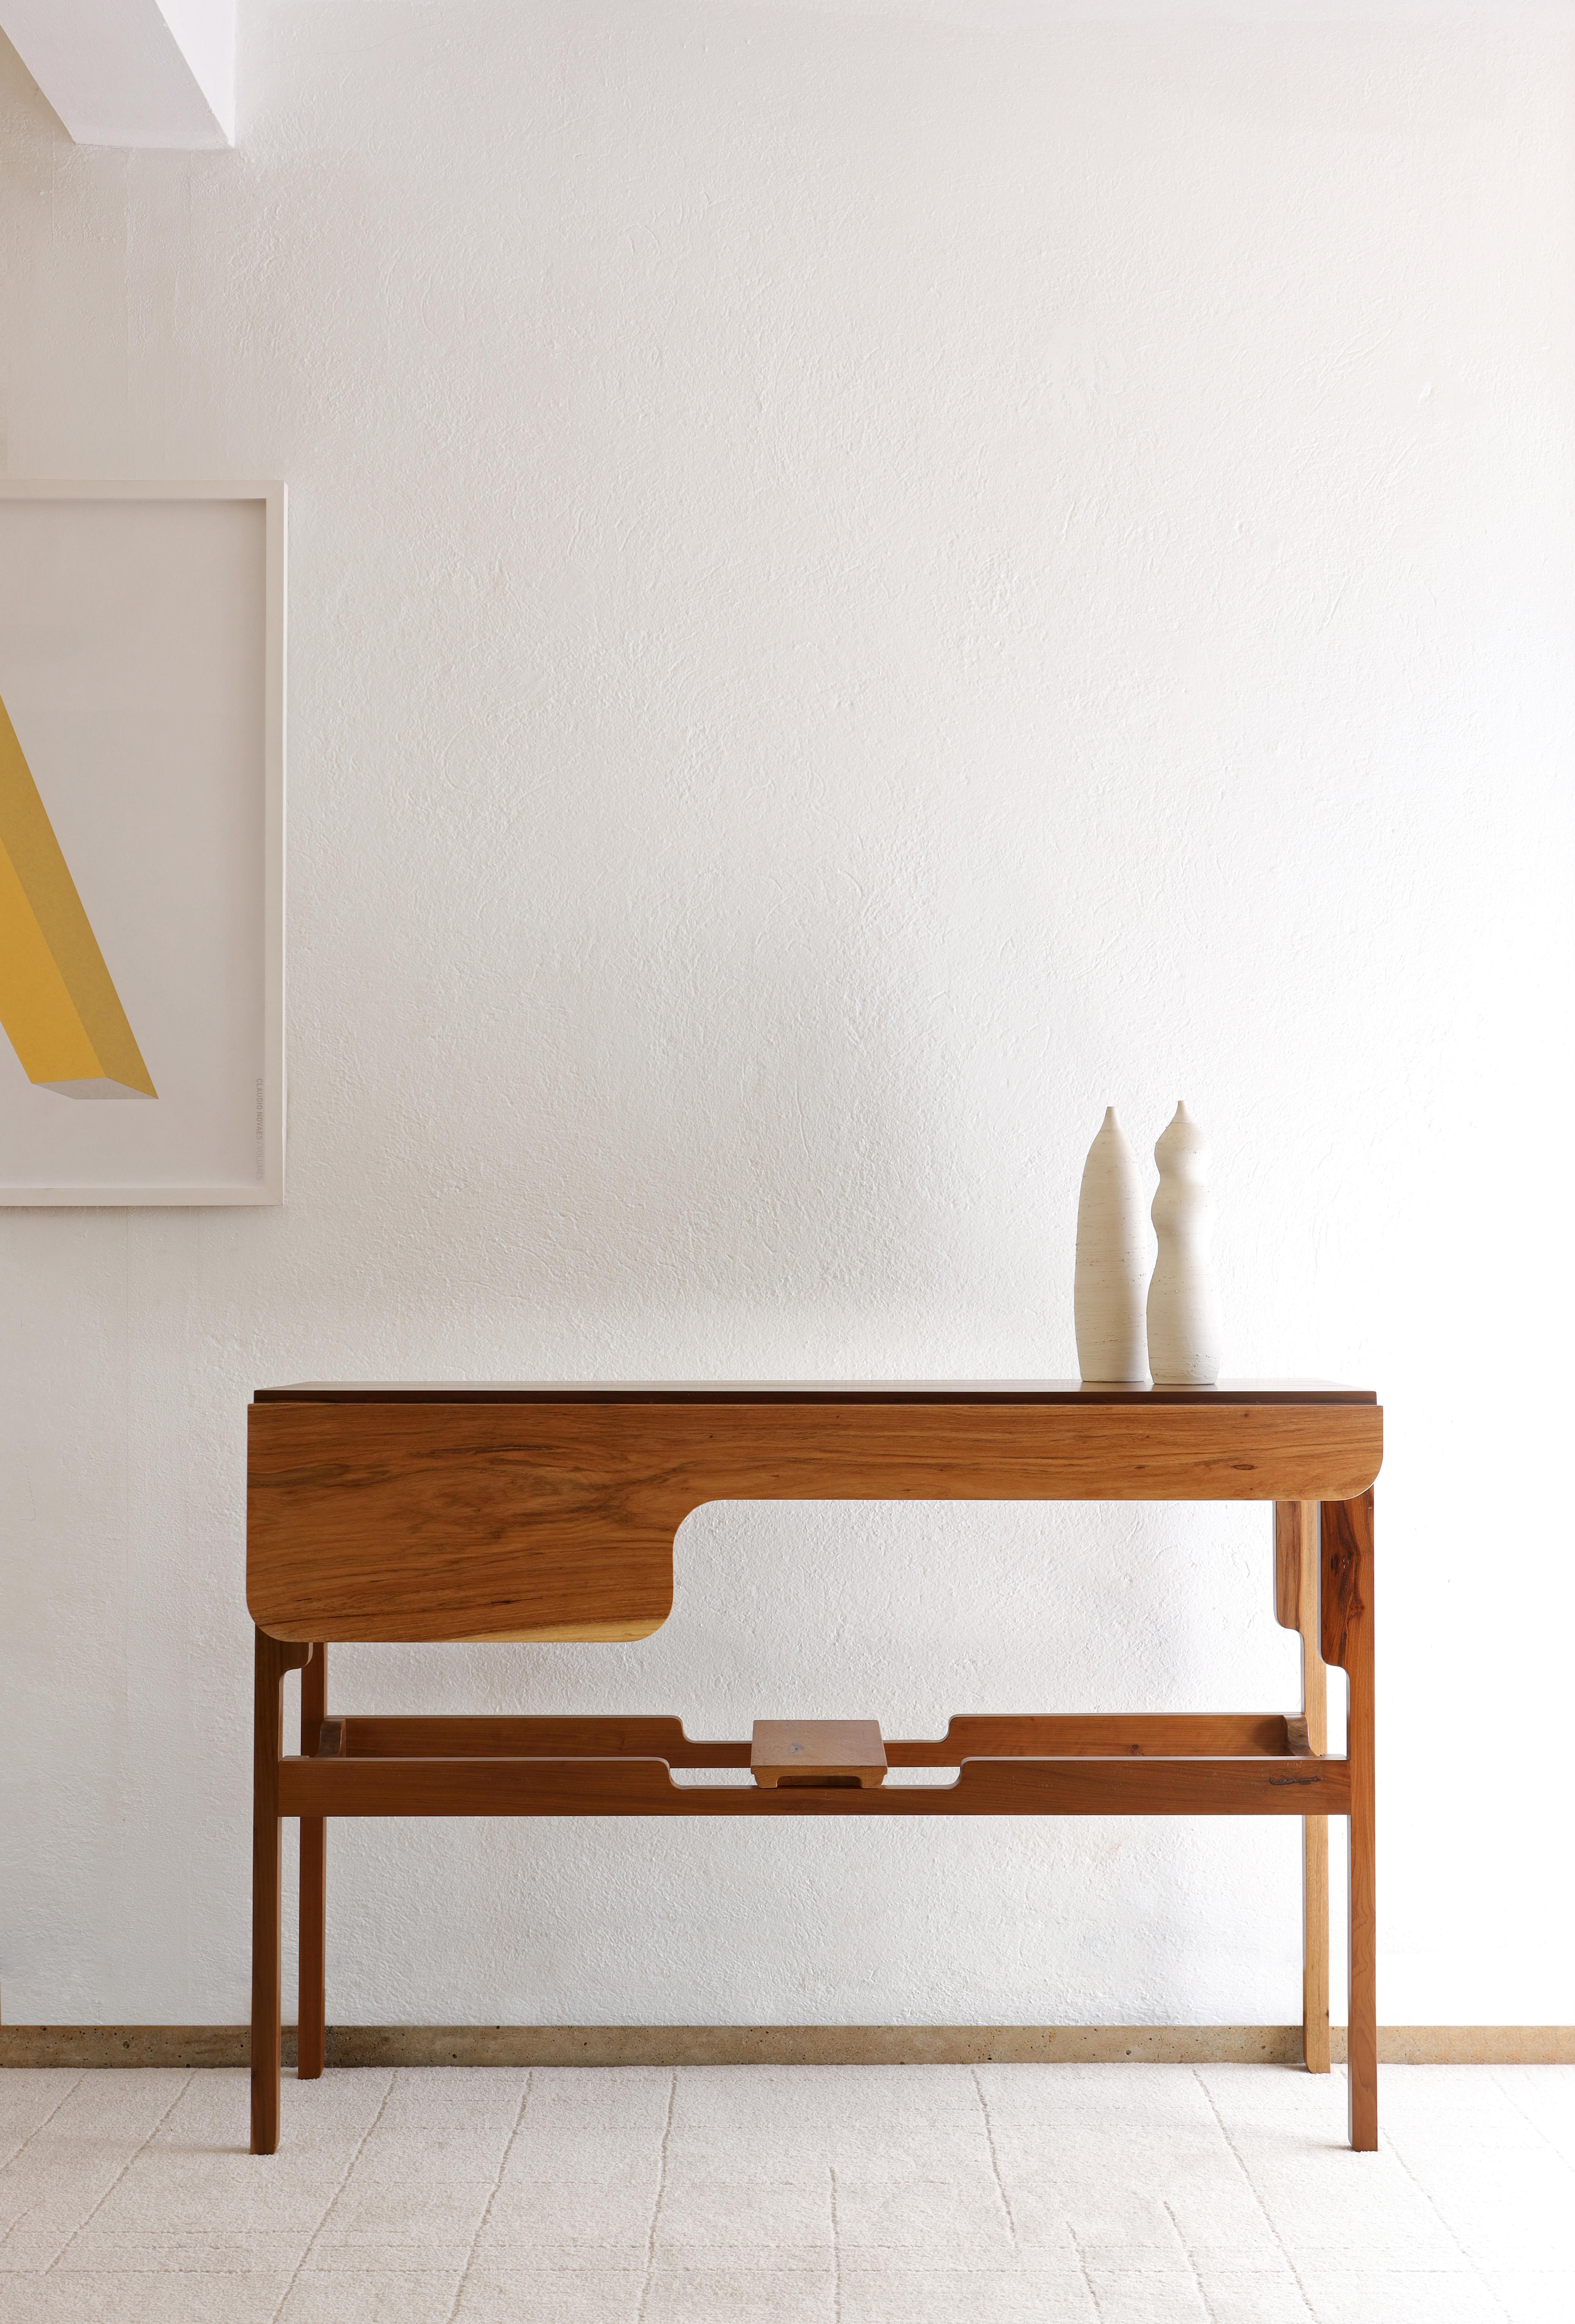 With light and contemporary design, the Wing Console Table is manufactured in solid wood through the traditional woodwork techniques of fitting.

Closed, the articulable top confers personality to the furniture and open, can serve as a tray that